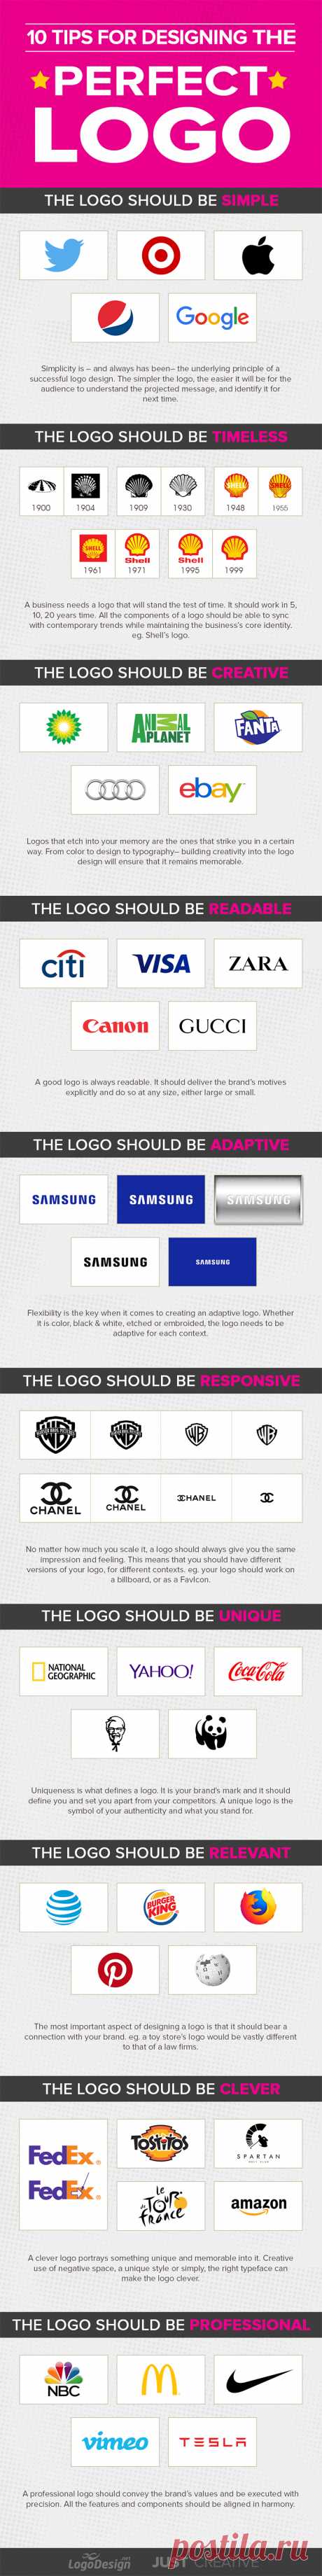 10 Tips for Designing the Perfect Logo That Makes Your Business Stand Out